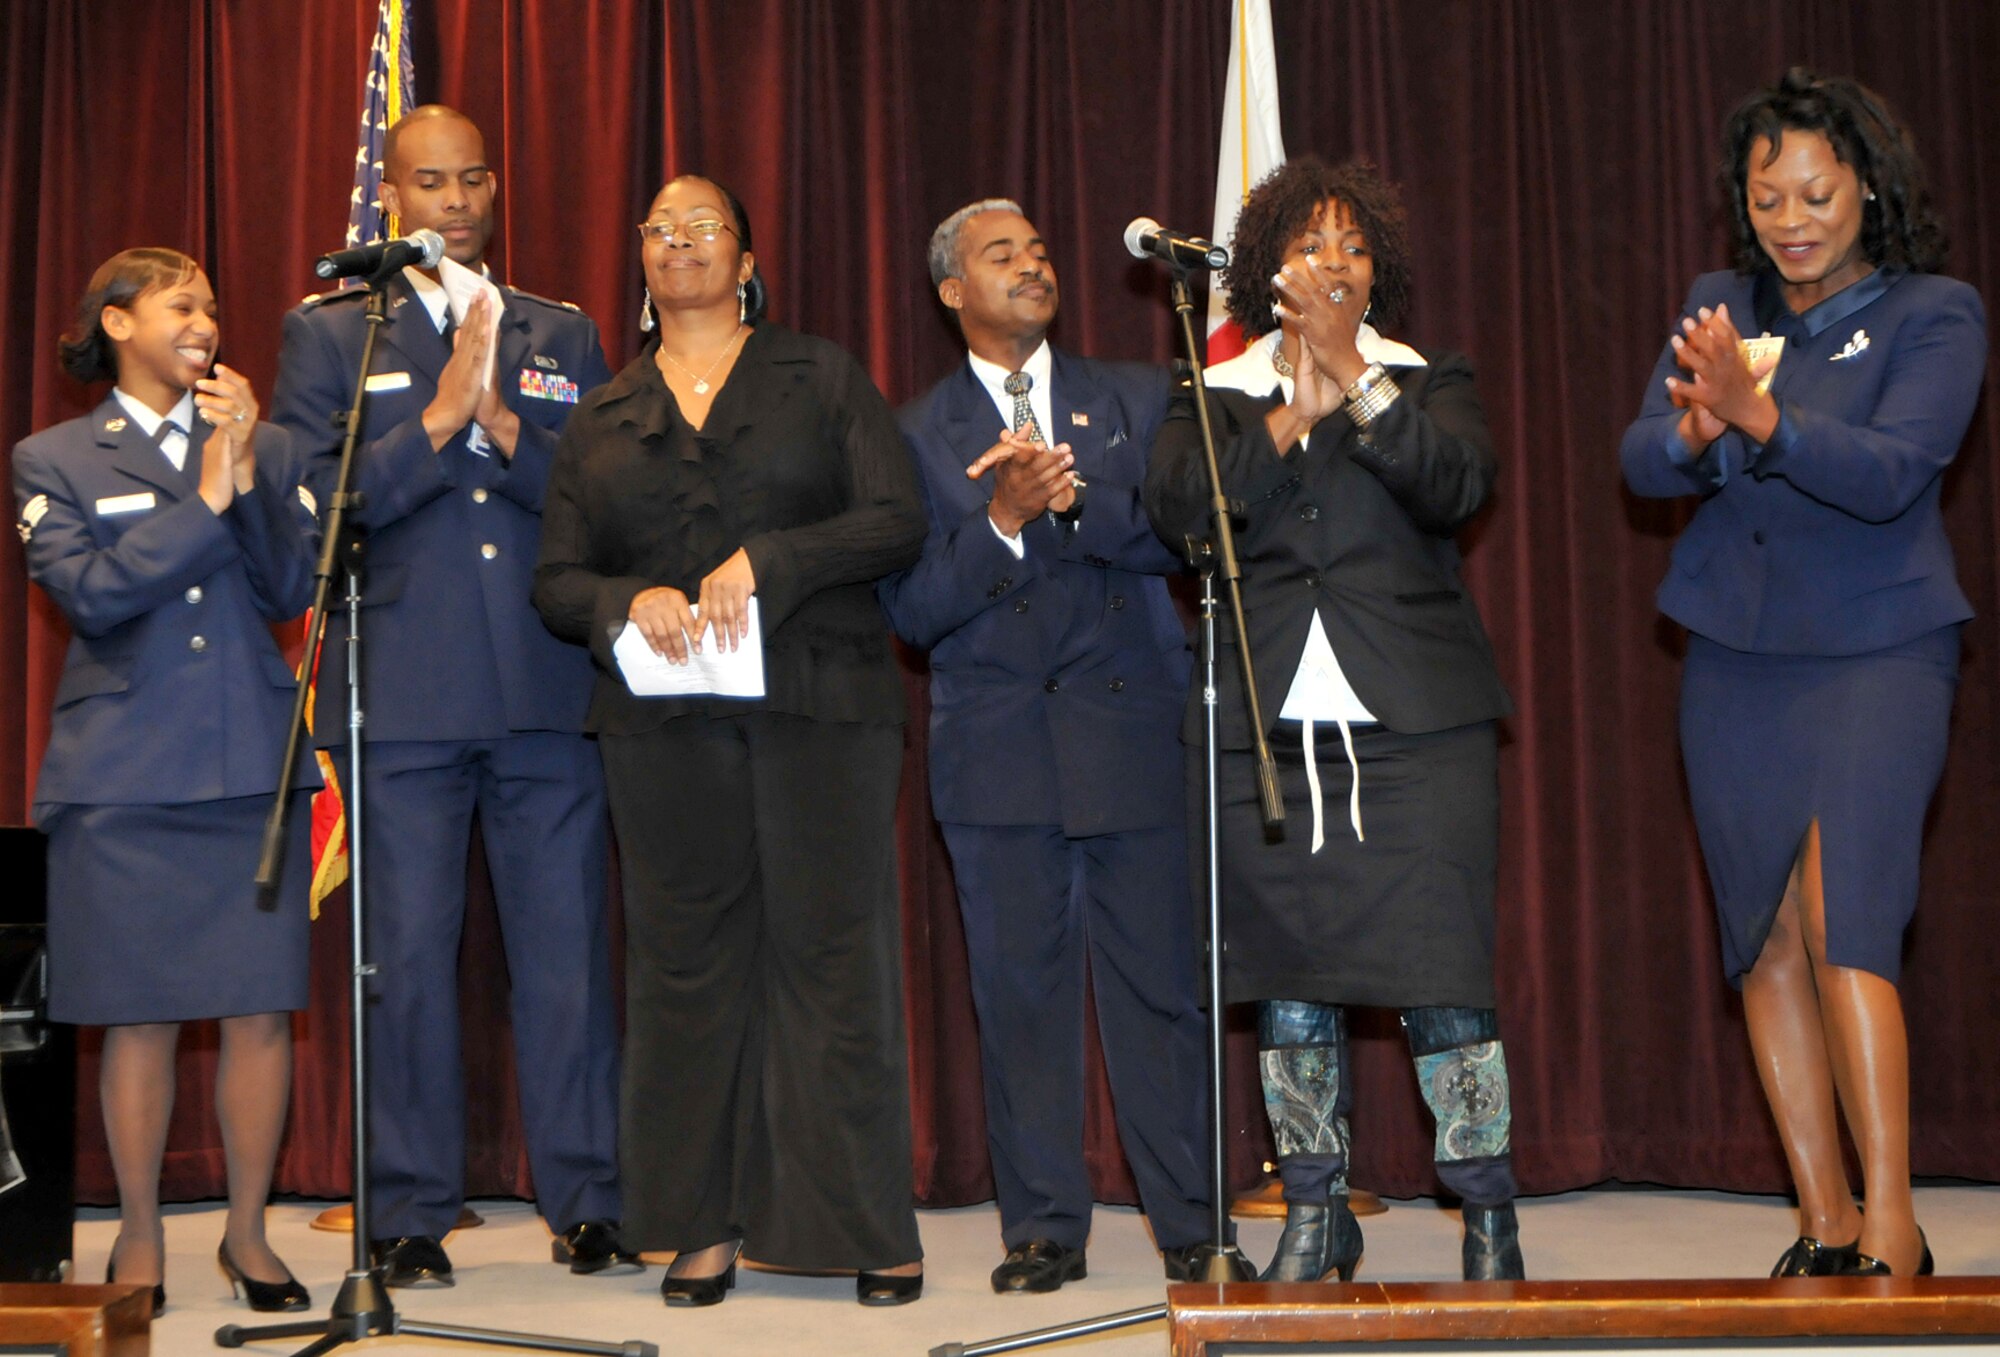 Singers perform during the Black History month luncheon celebrated jointly by SMC and The Aerospace Corporation, Feb. 19.  Keynote speaker, Dr. Terrence Roberts, a member of the Little Rock Nine, spoke of his experiences as one of the nine students who attended Central High School in Little Rock, Ark. and of his perspectives on integration in the United States. (Photo by Atiba S. Copeland)